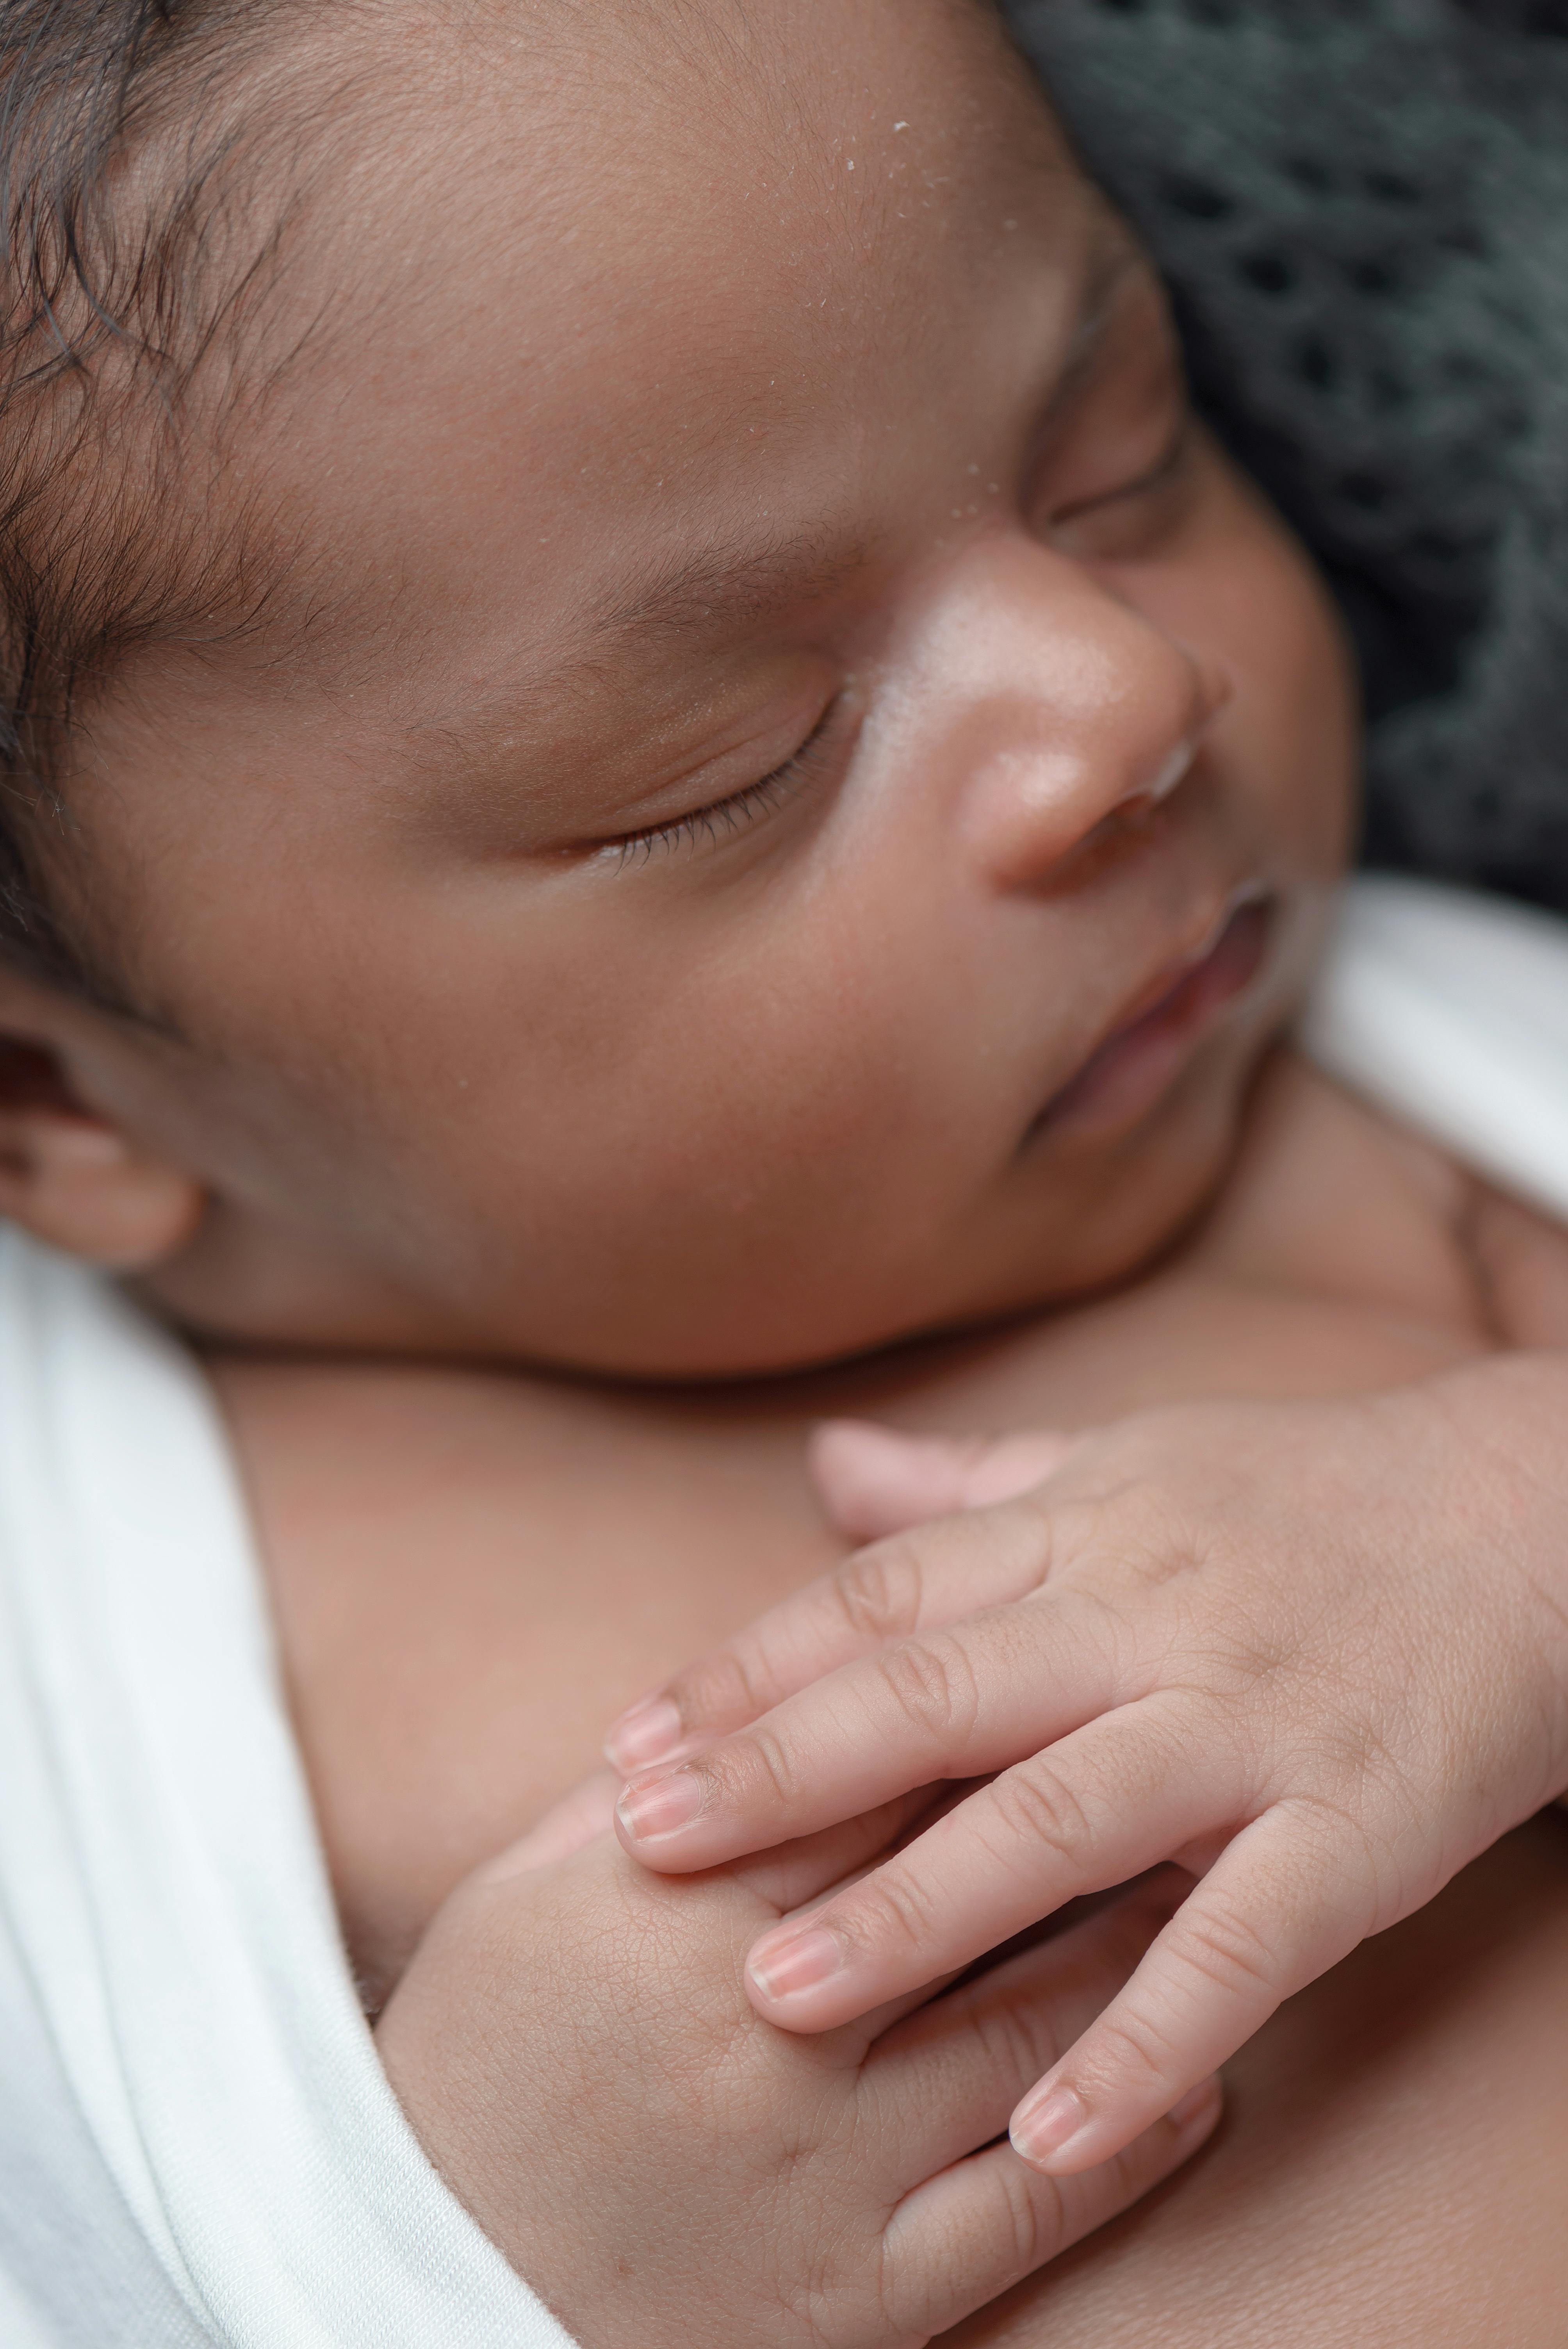 A baby sleeping while covered in coat | Source: Pexels